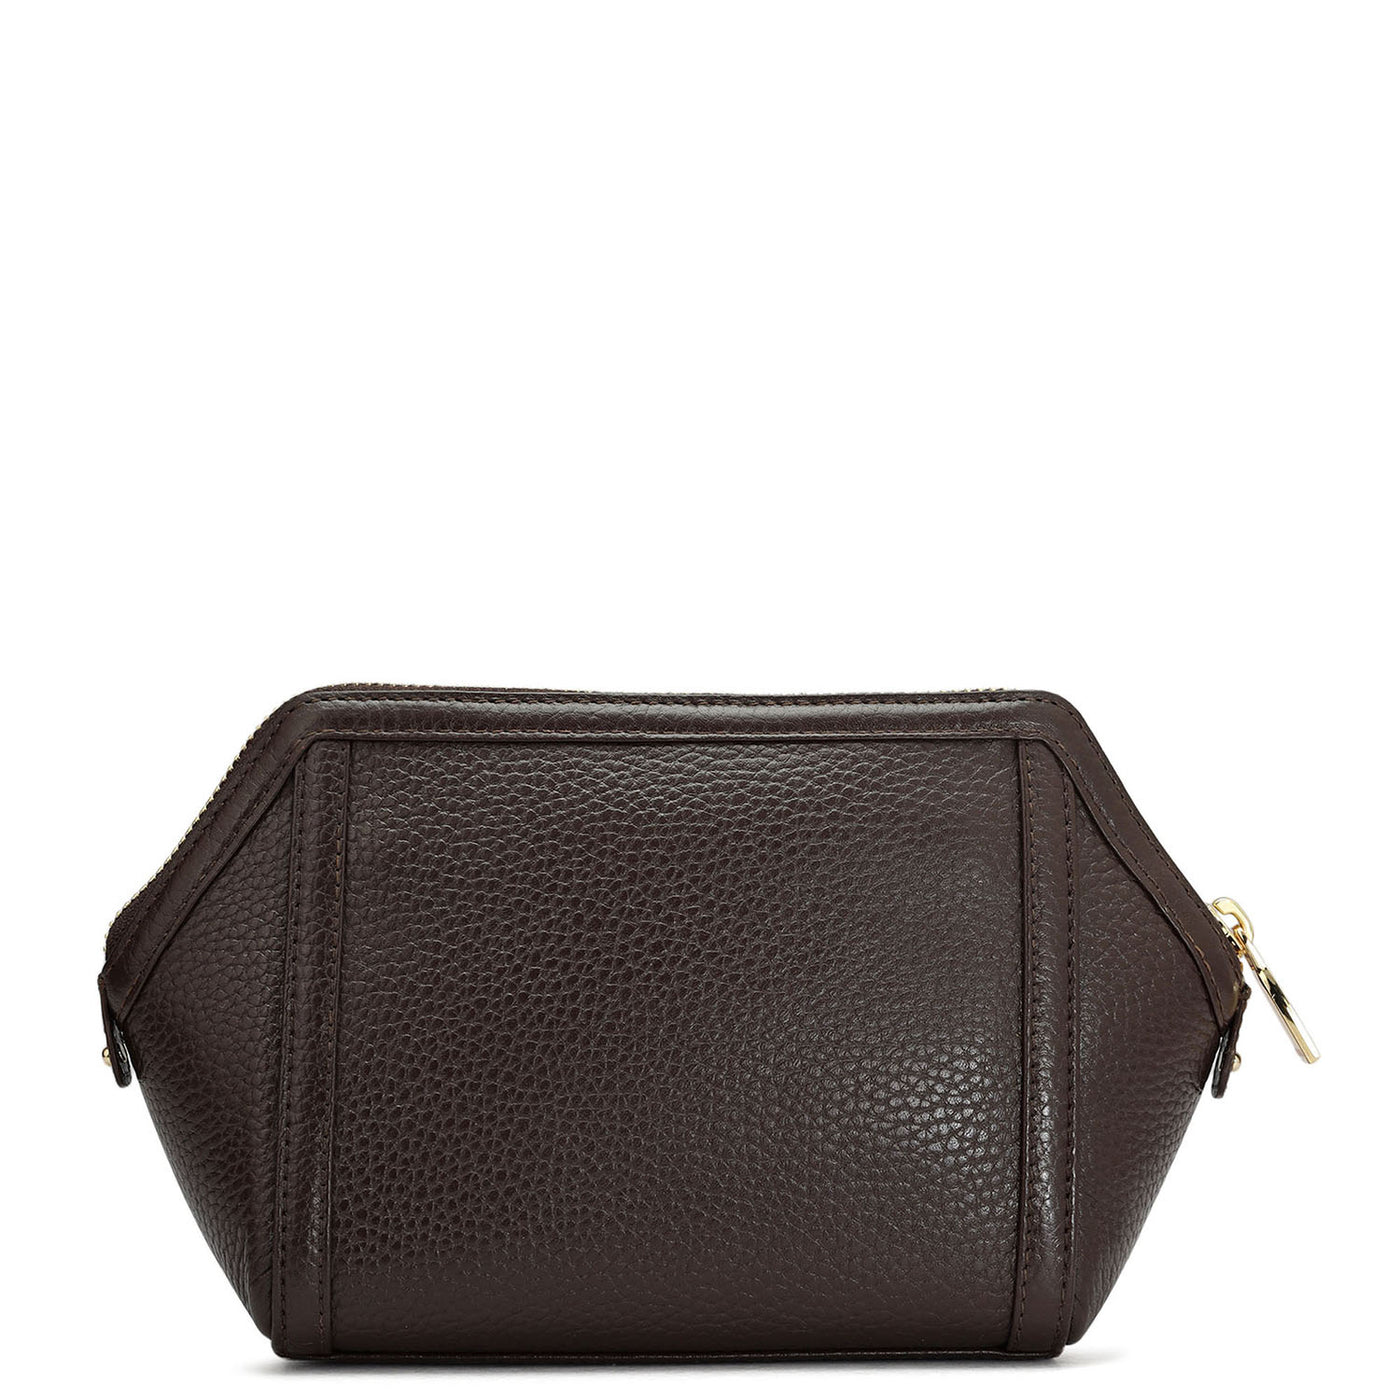 Wax Leather Vanity Pouch - Chocolate